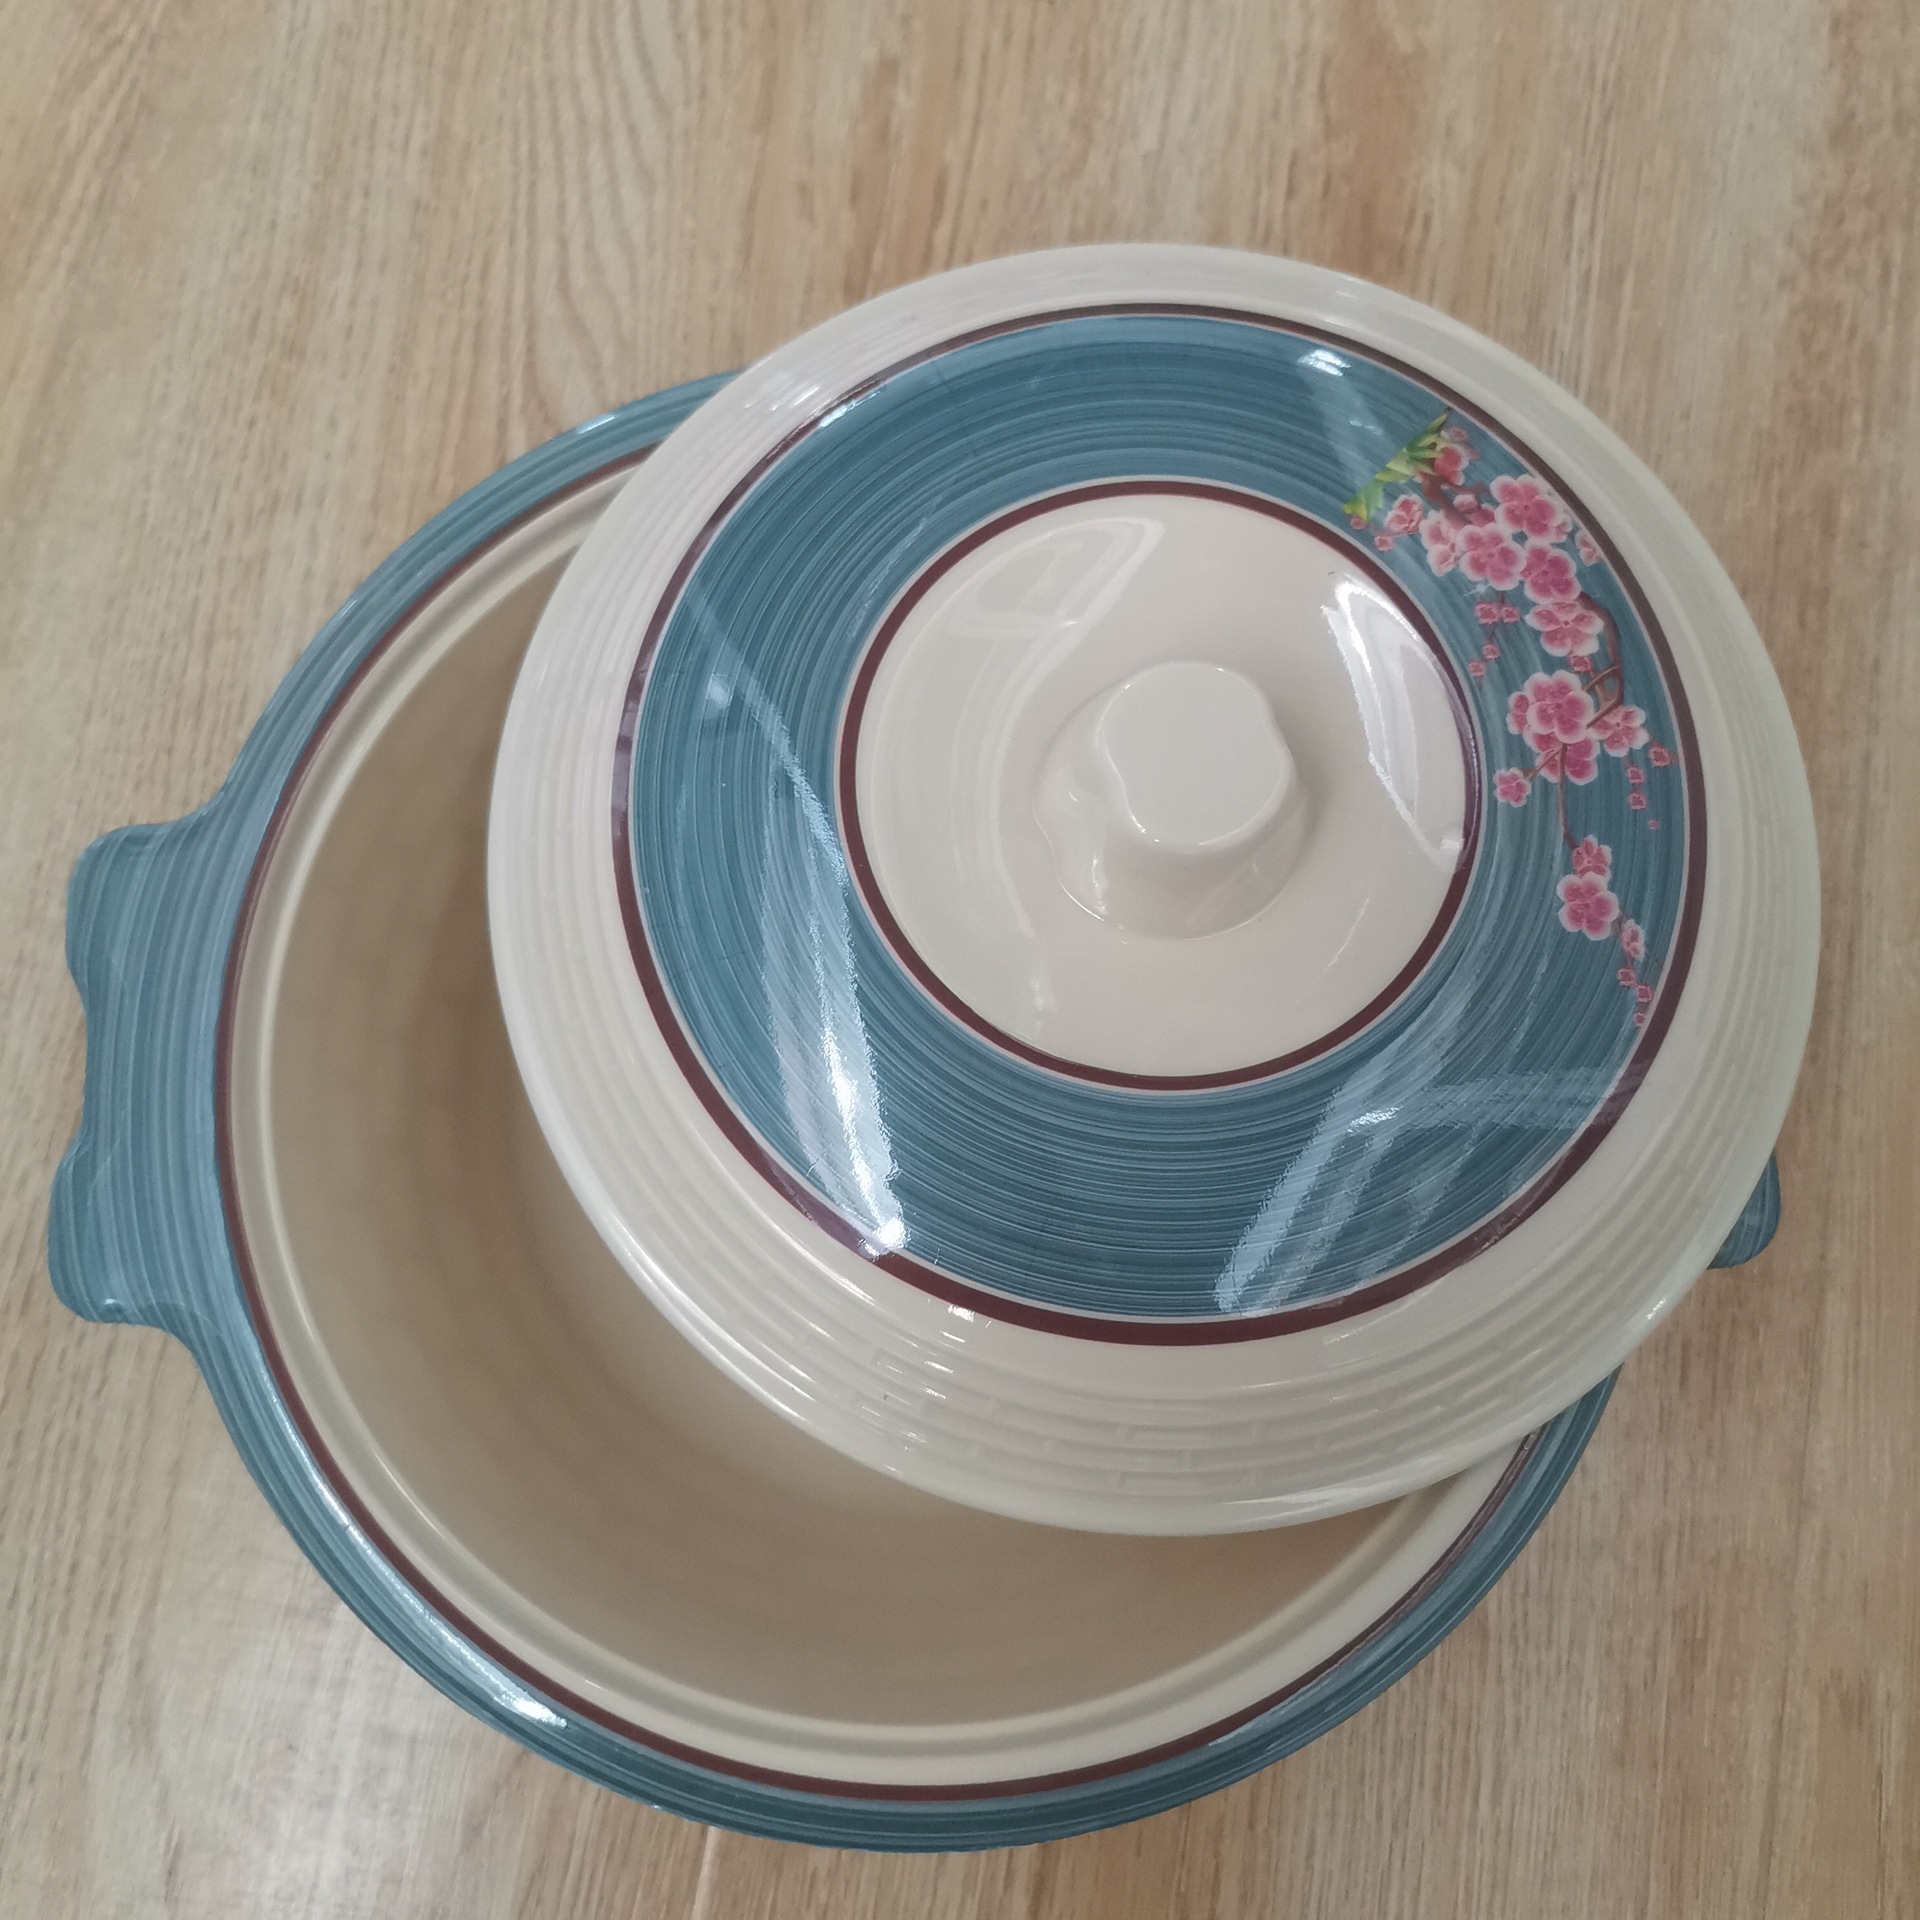 New 30% Melamine Exported to Africa with Handle Large round Melamine Melamine Melamine Tureen